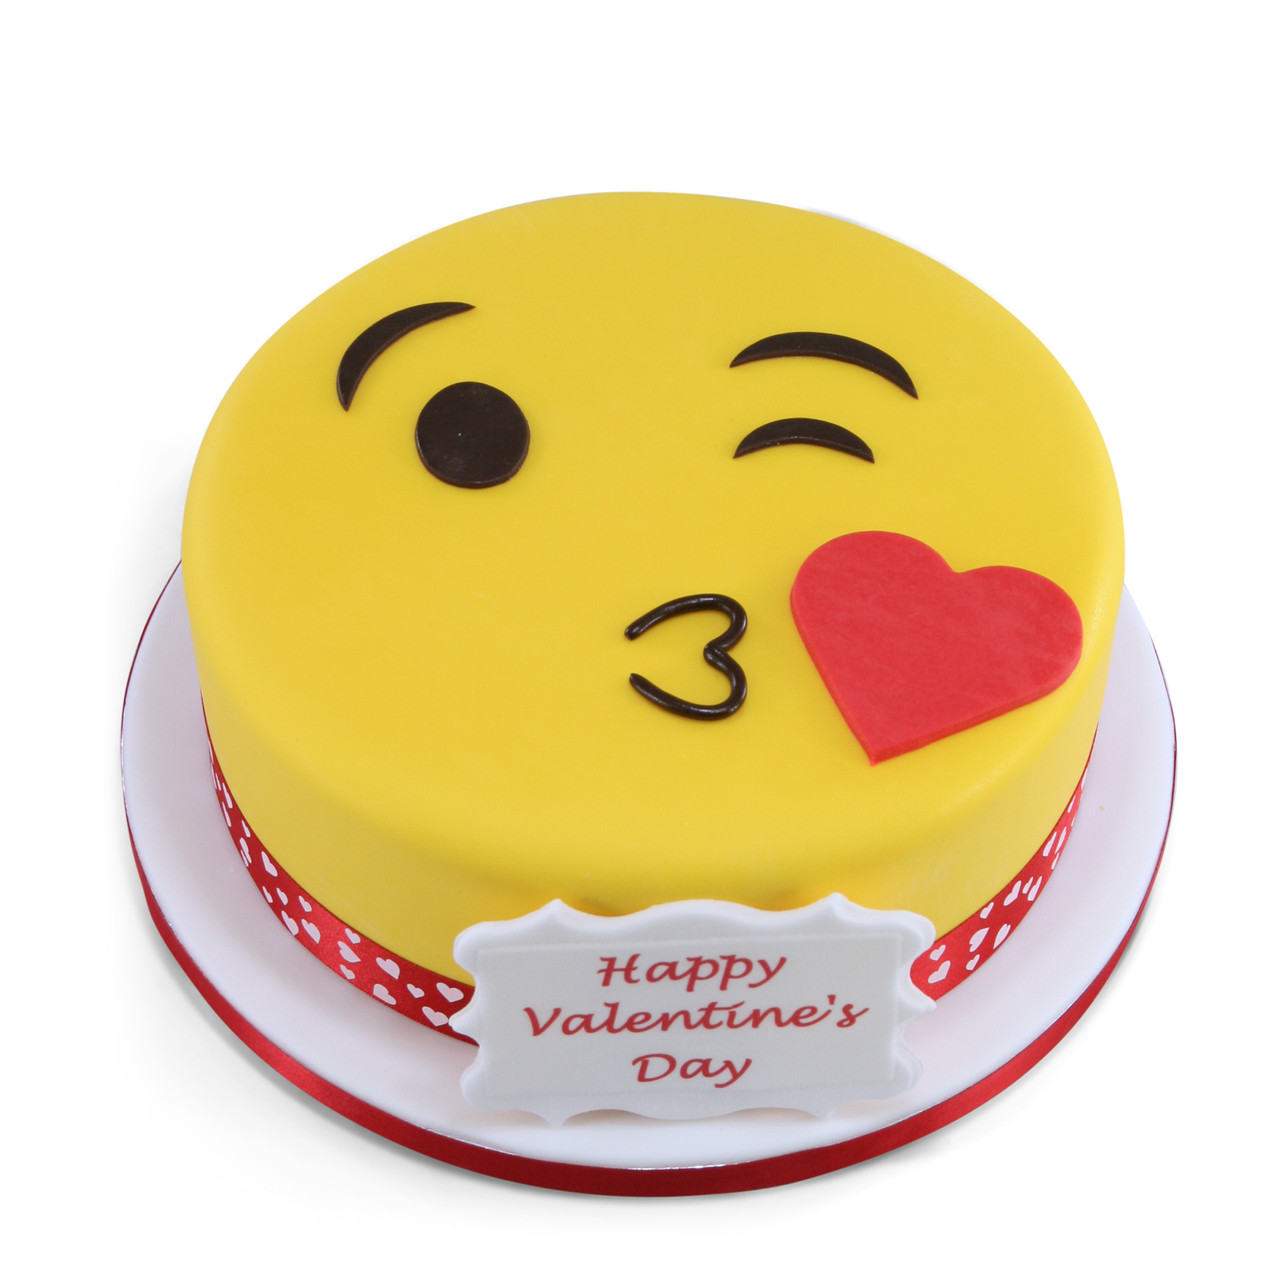 Blow a Kiss Emoji Cake | Valentine's Day Cakes| The Cake Store